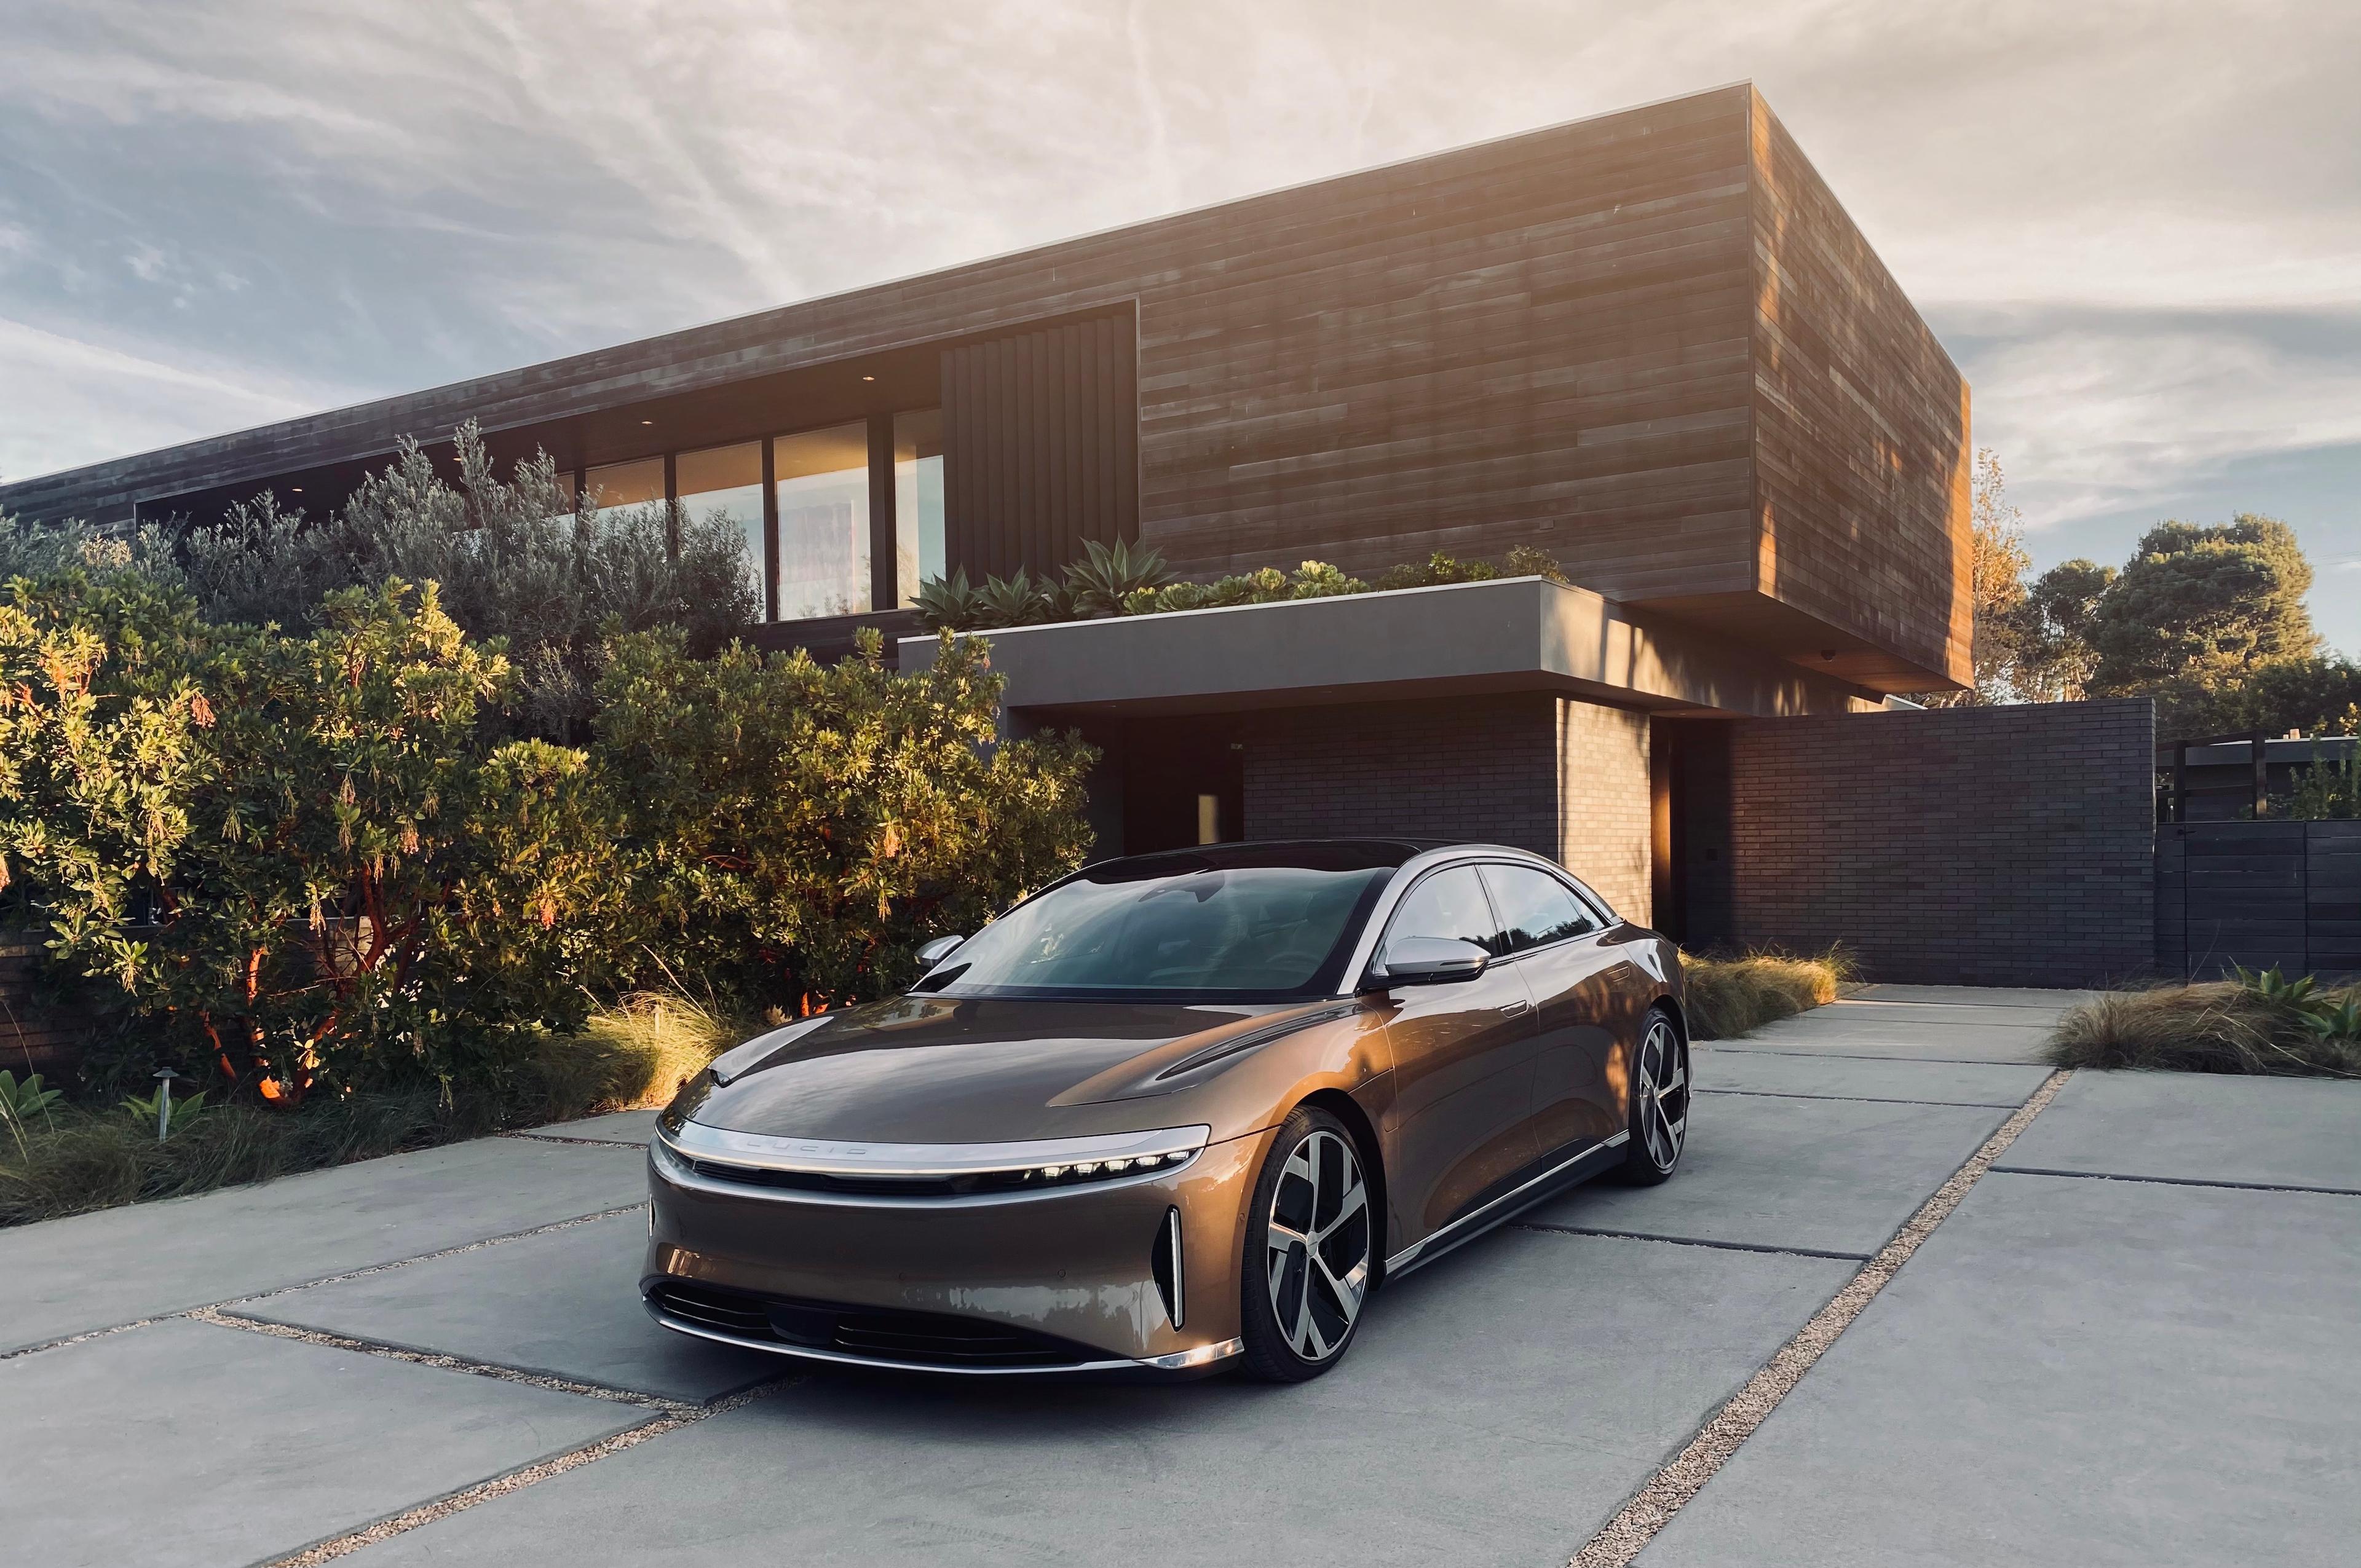 The Lucid Air is able to travel an eye-catching 520 miles off of one charge.